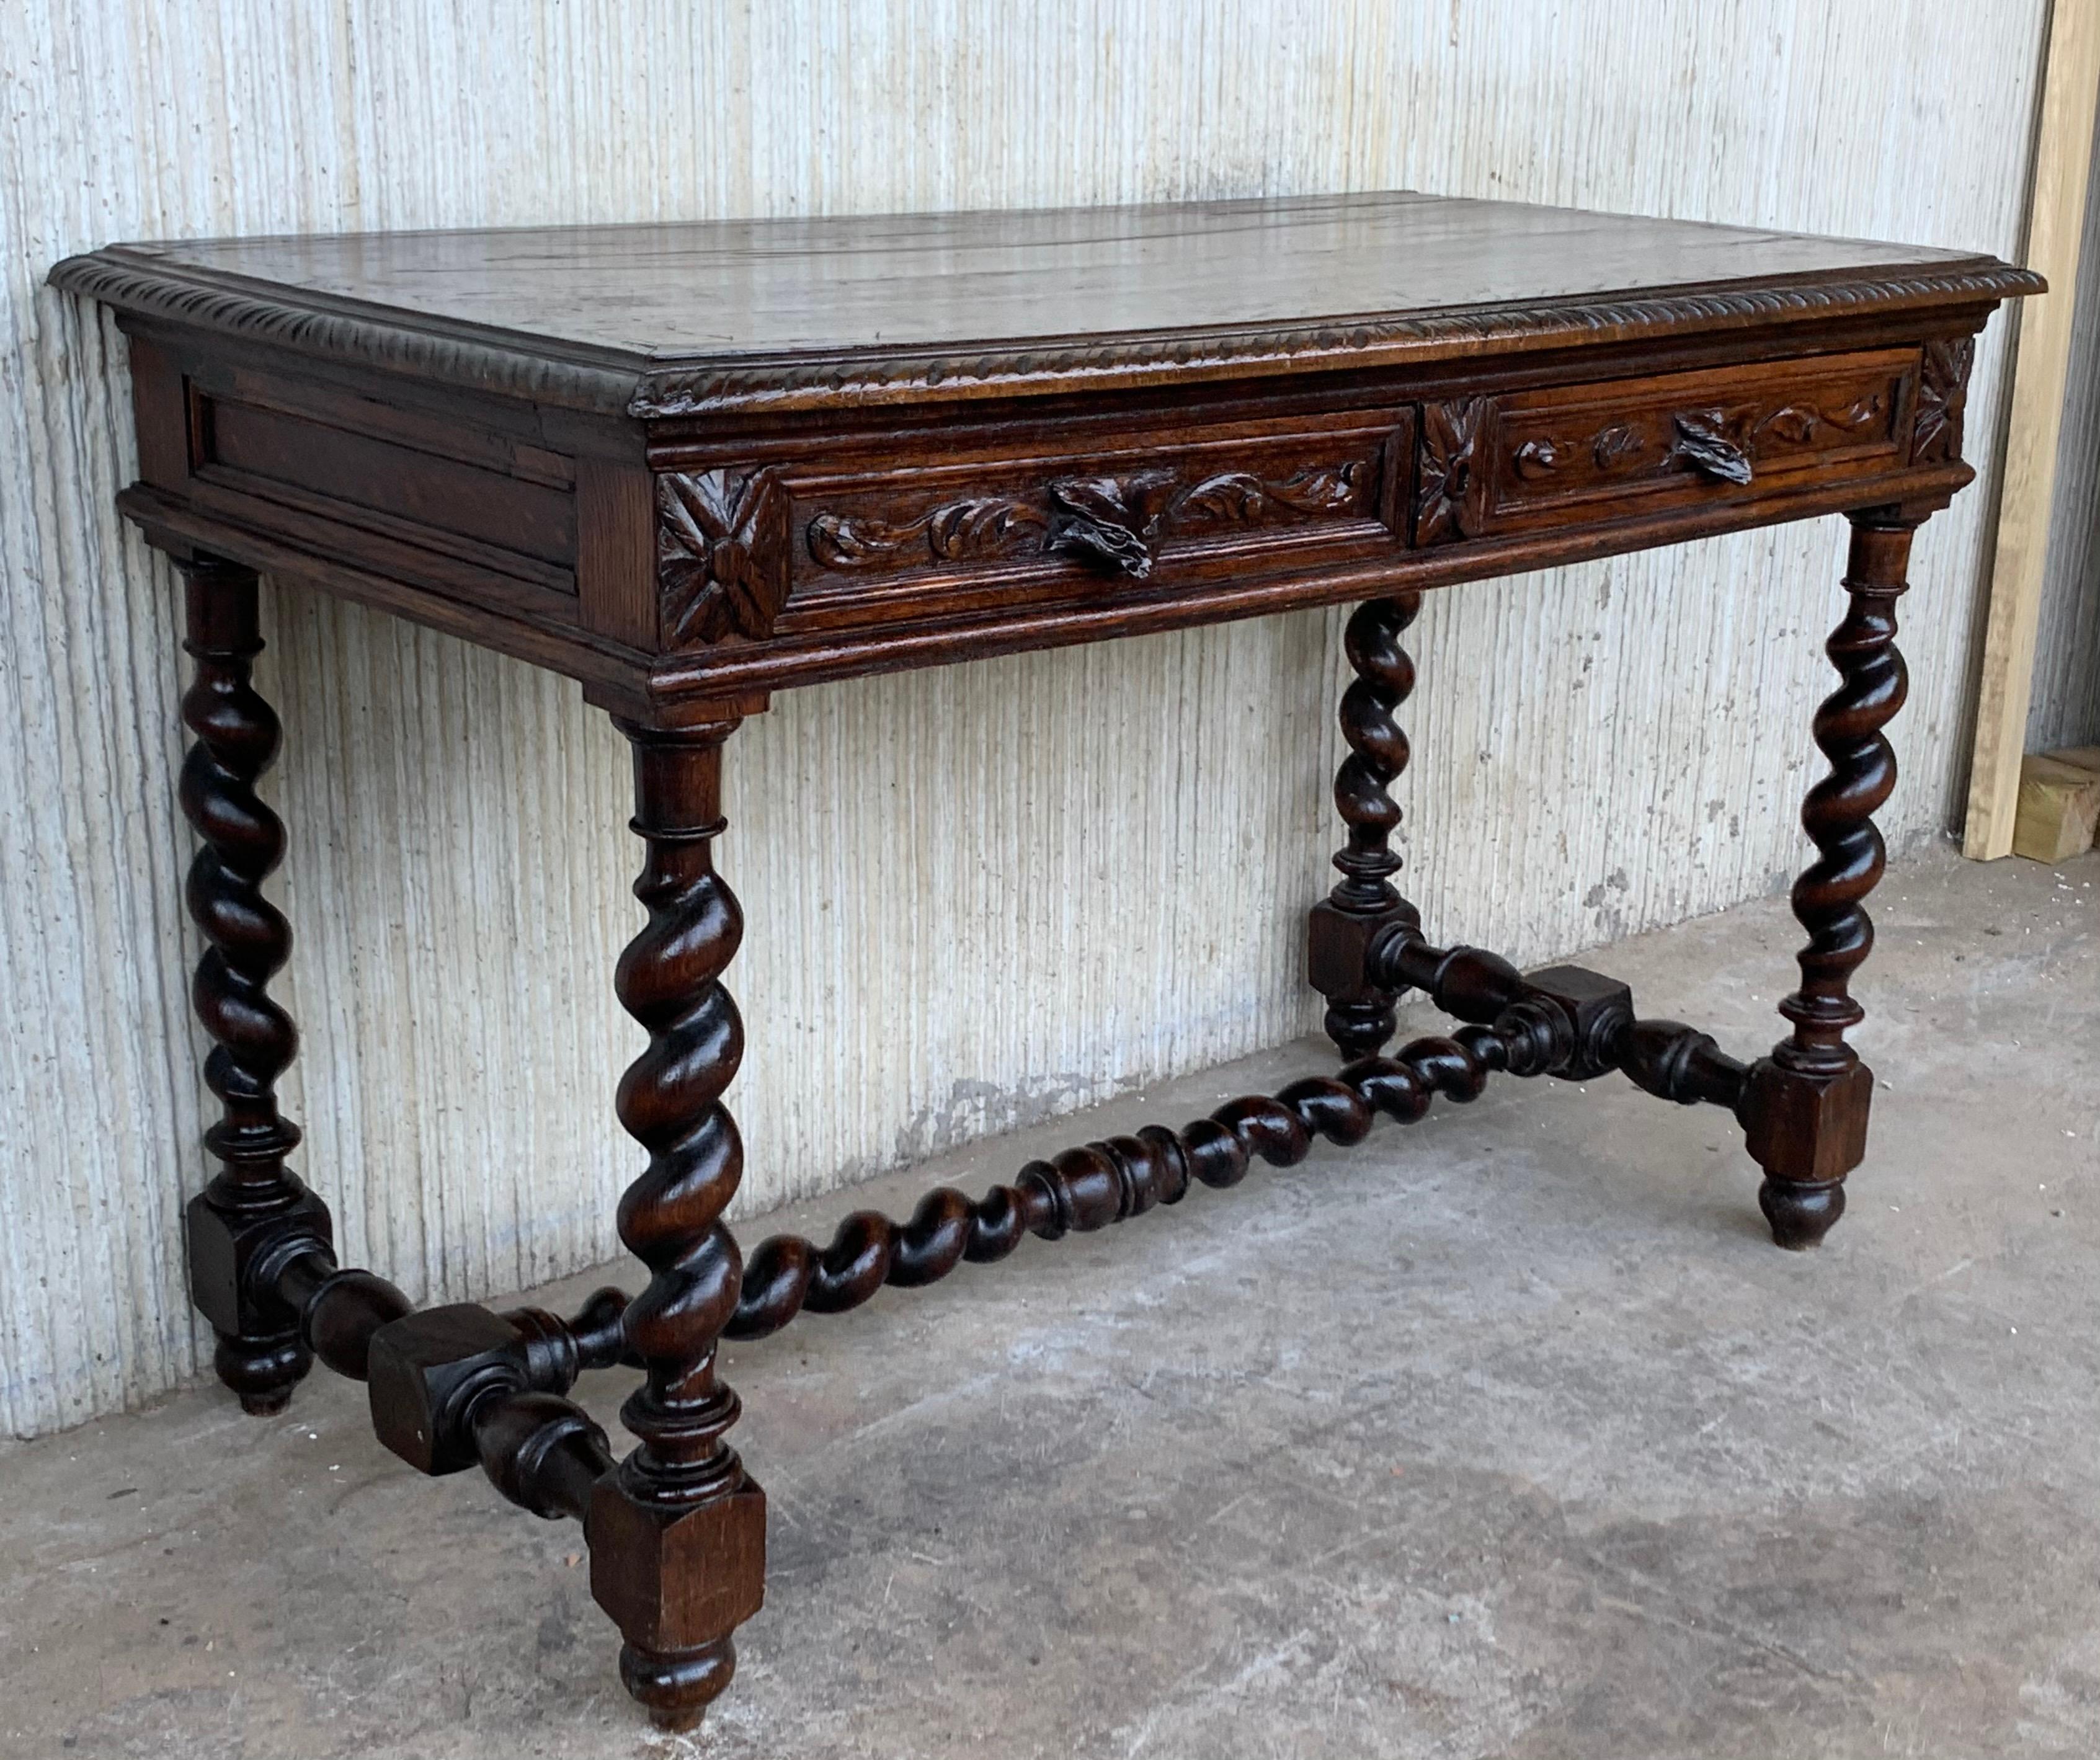 Baroque 19th Spanish Walnut Desk or Console with Two Drawers and Solomonic Turning Legs